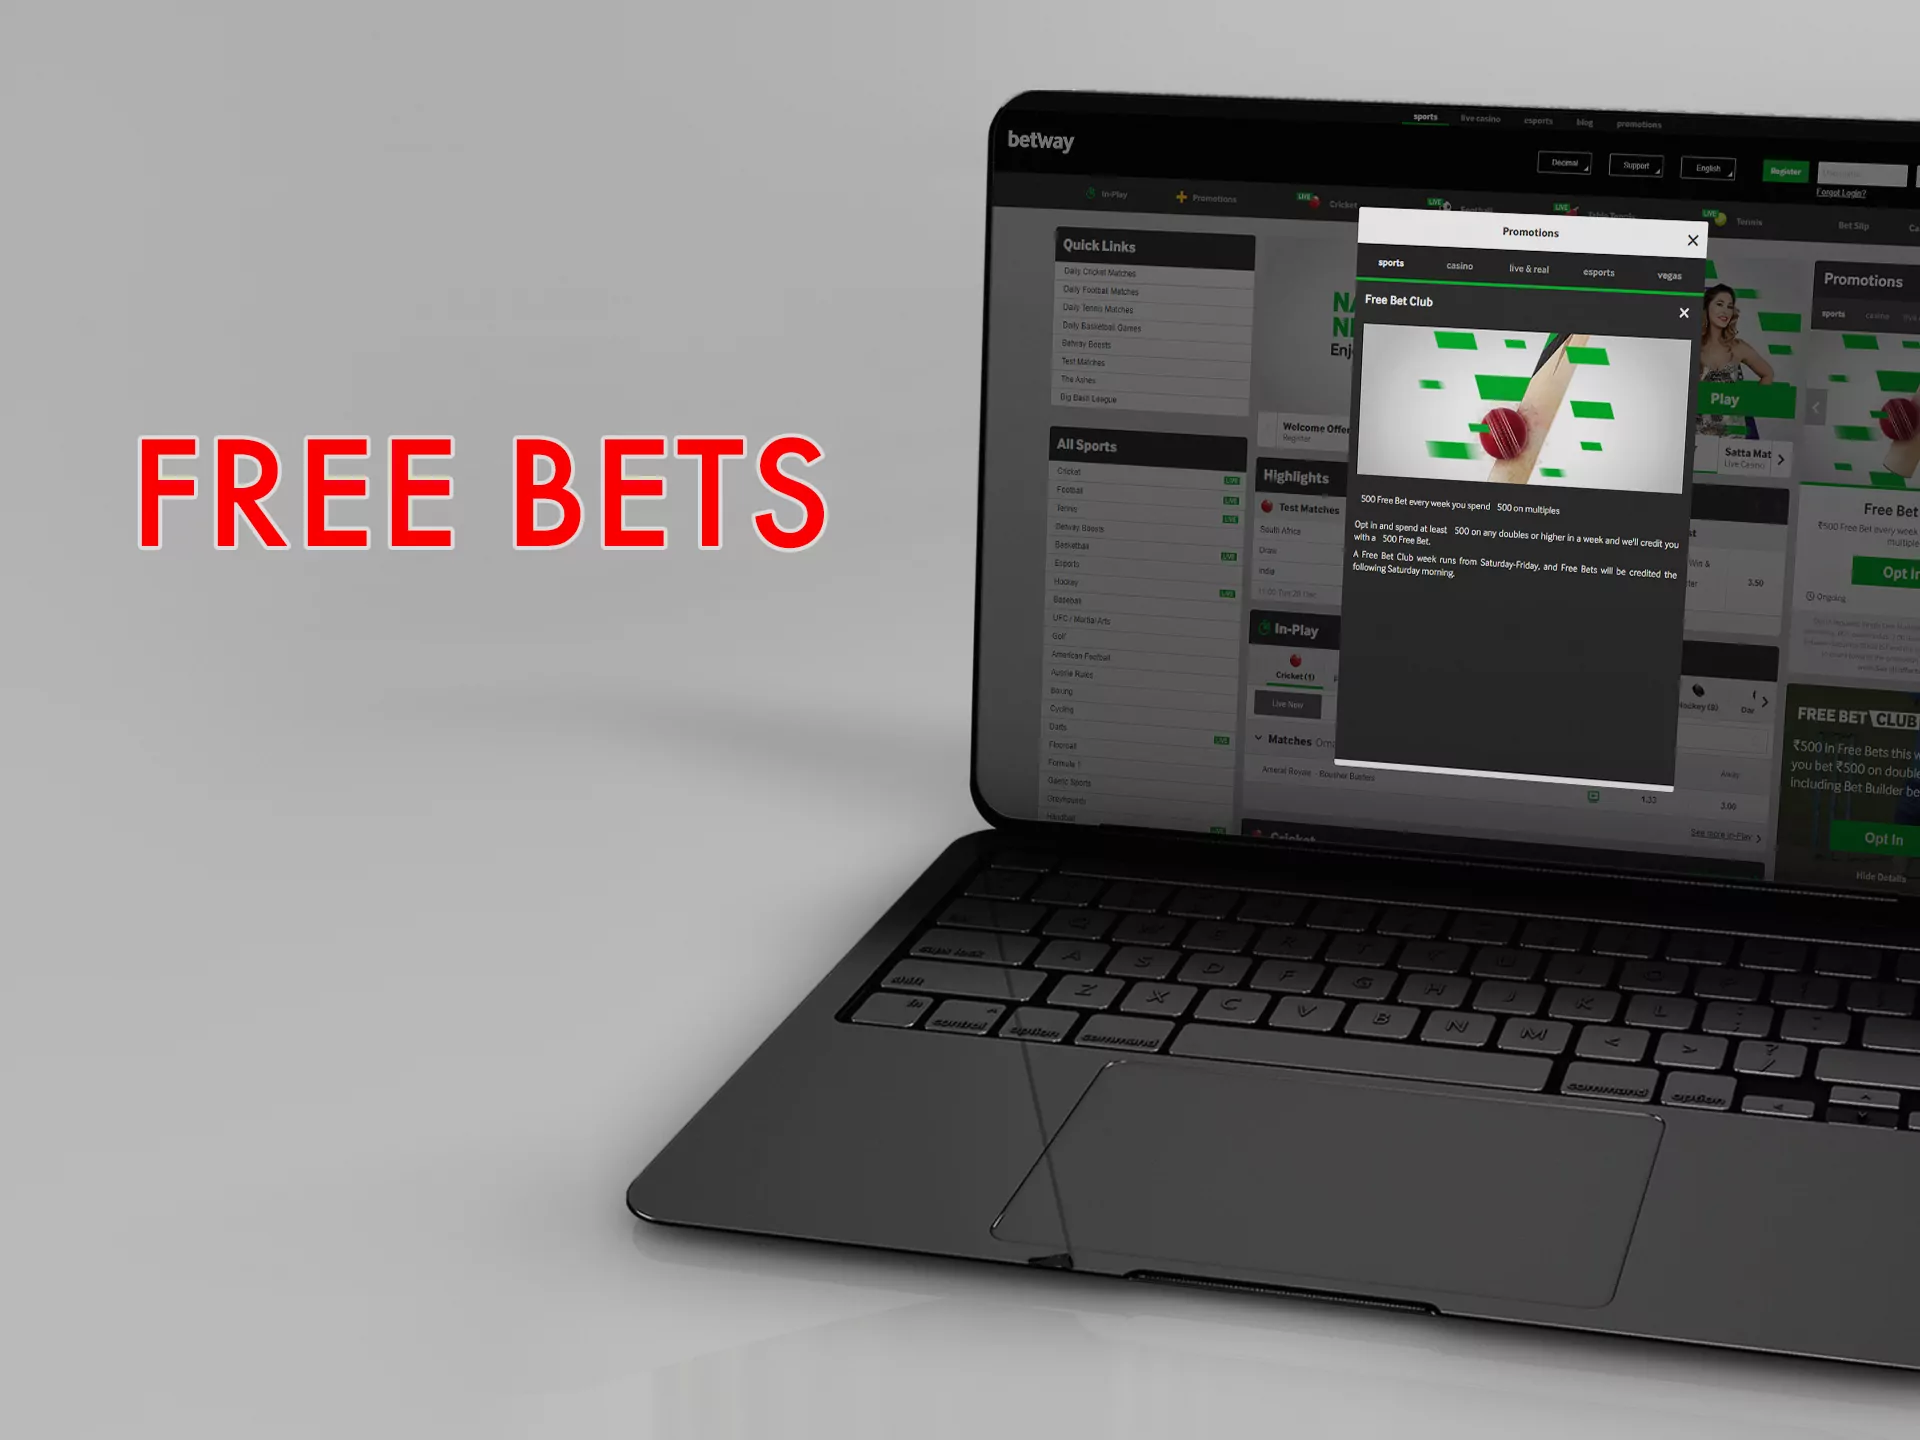 Free bet is another type of bonus that sites give their users.